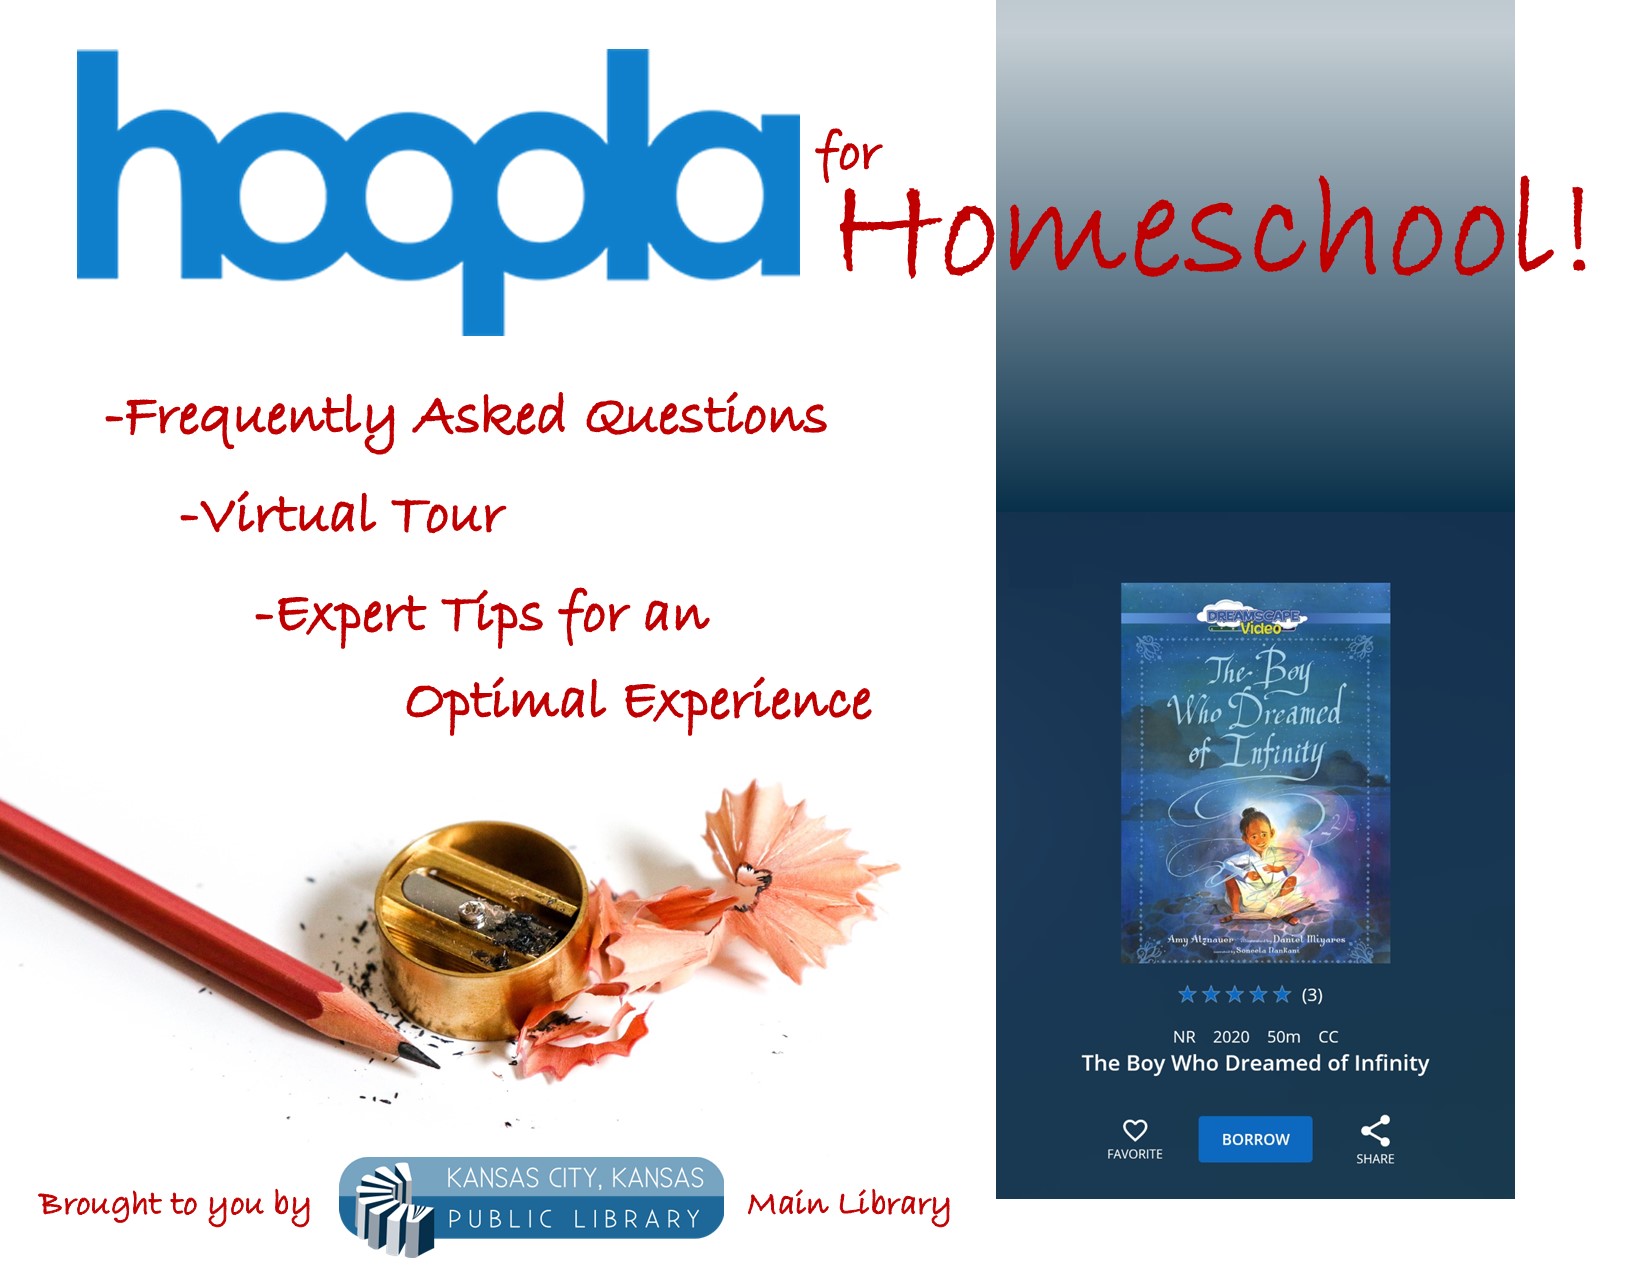 Hoopla for Homeschool brought to you by KCKPL Main Library